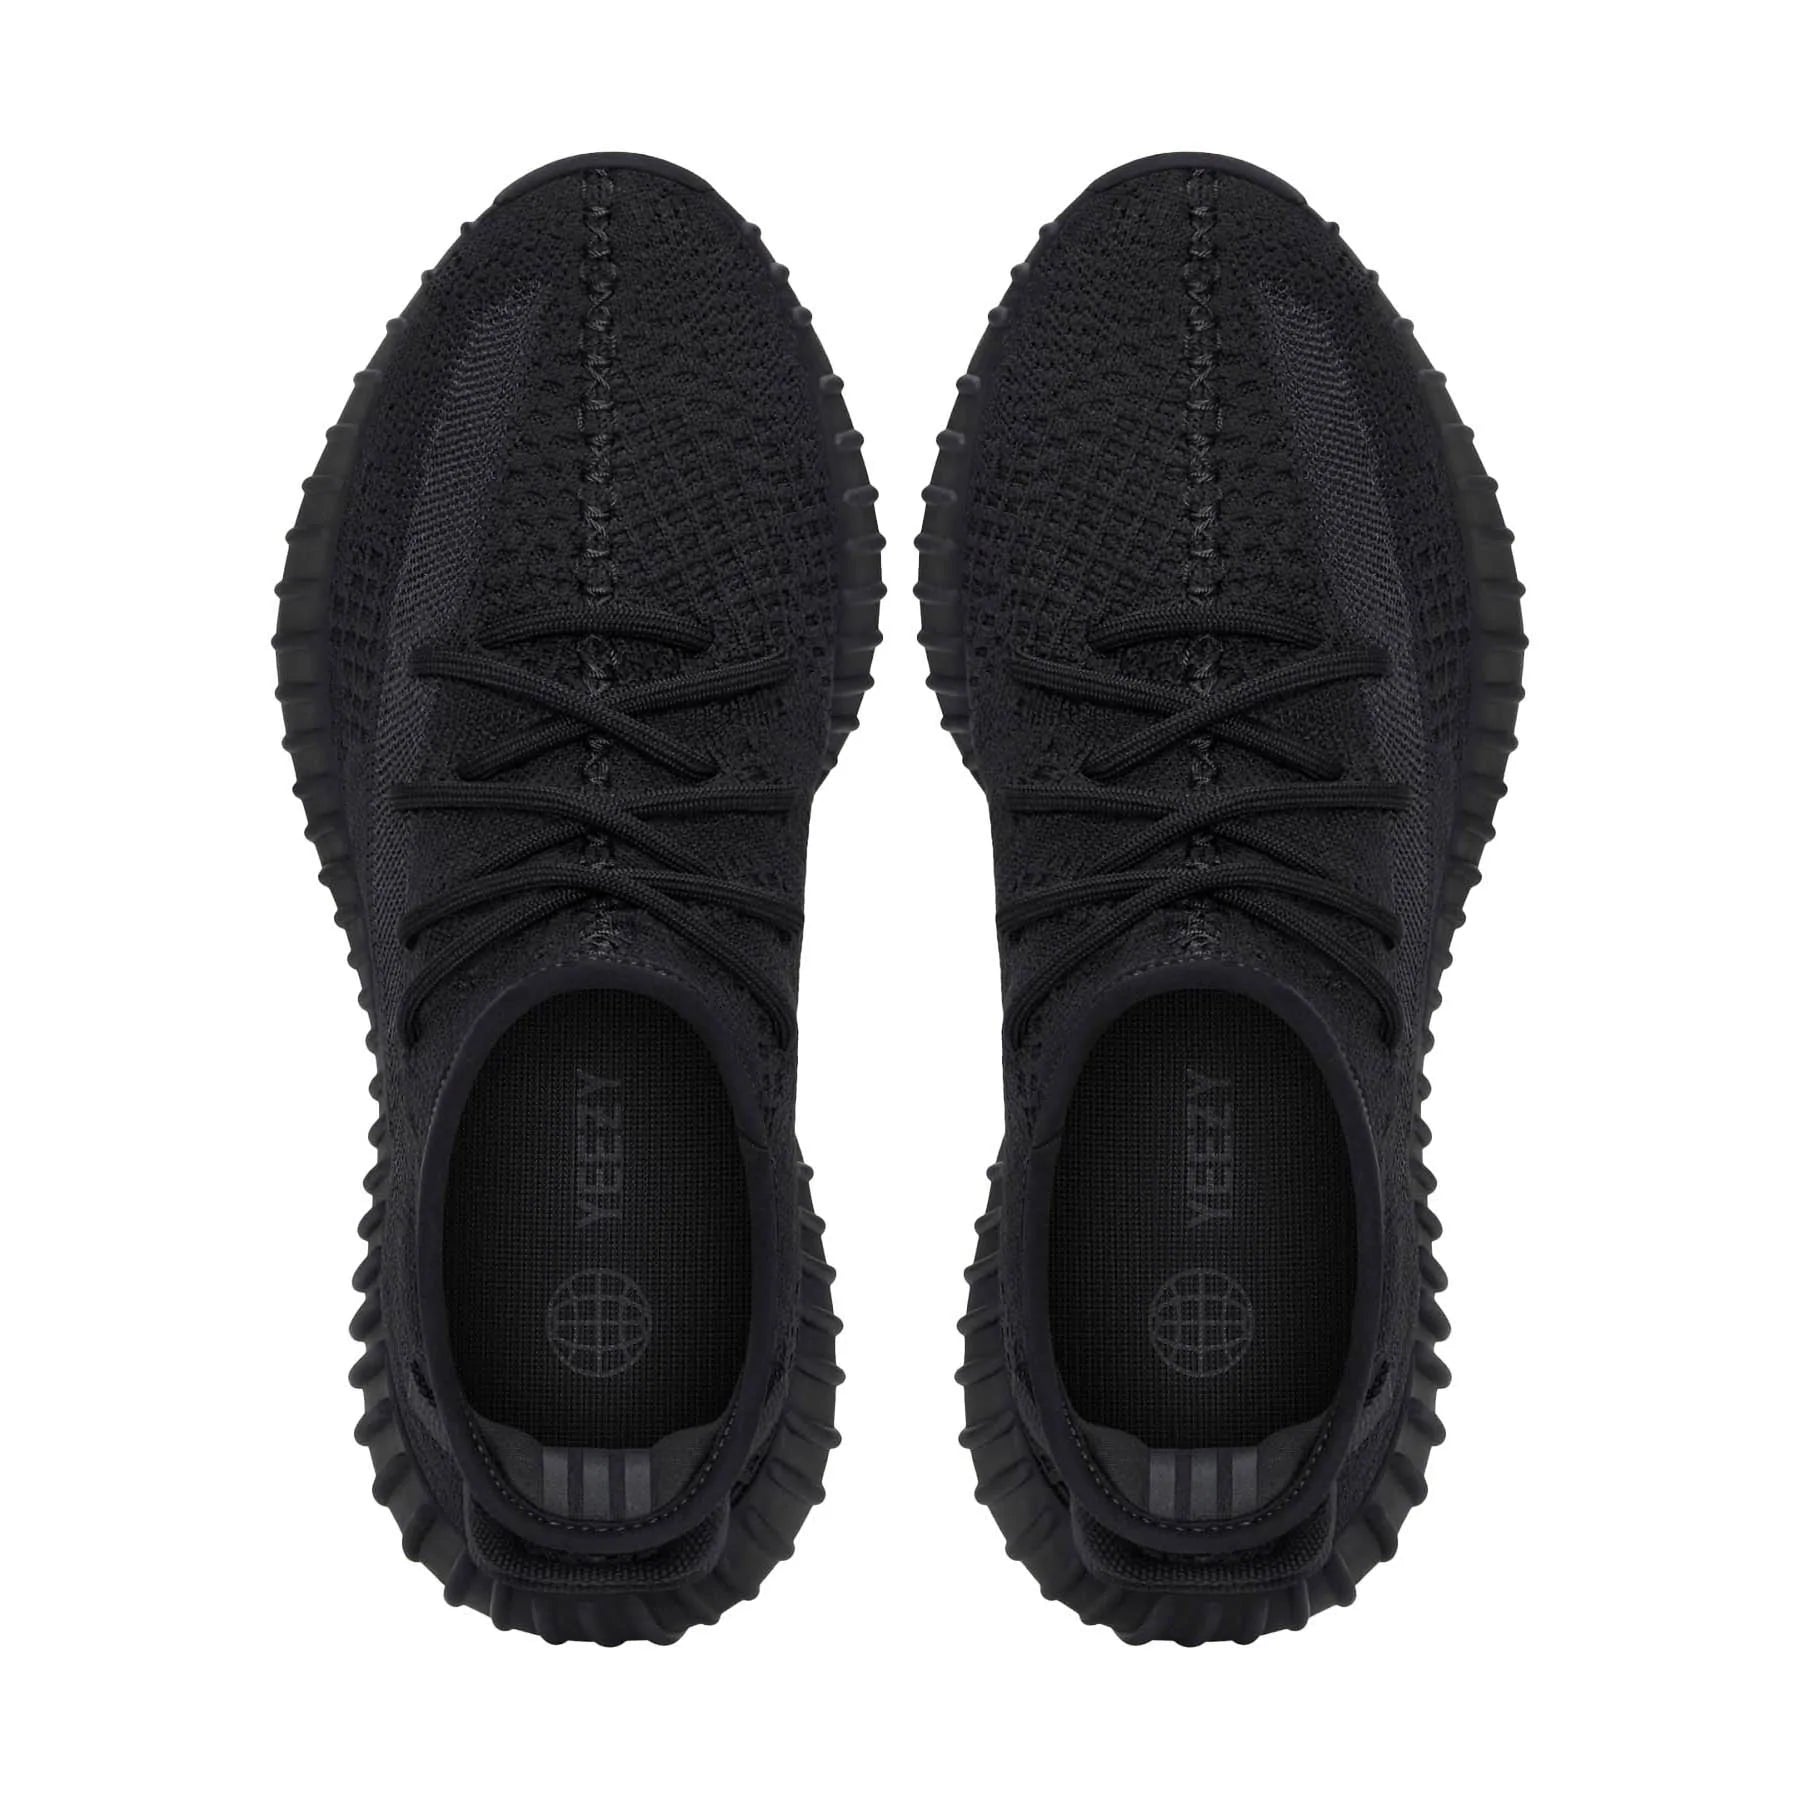 Double Boxed  599.99 adidas Yeezy Boost 350 V2 Black Onyx Double Boxed